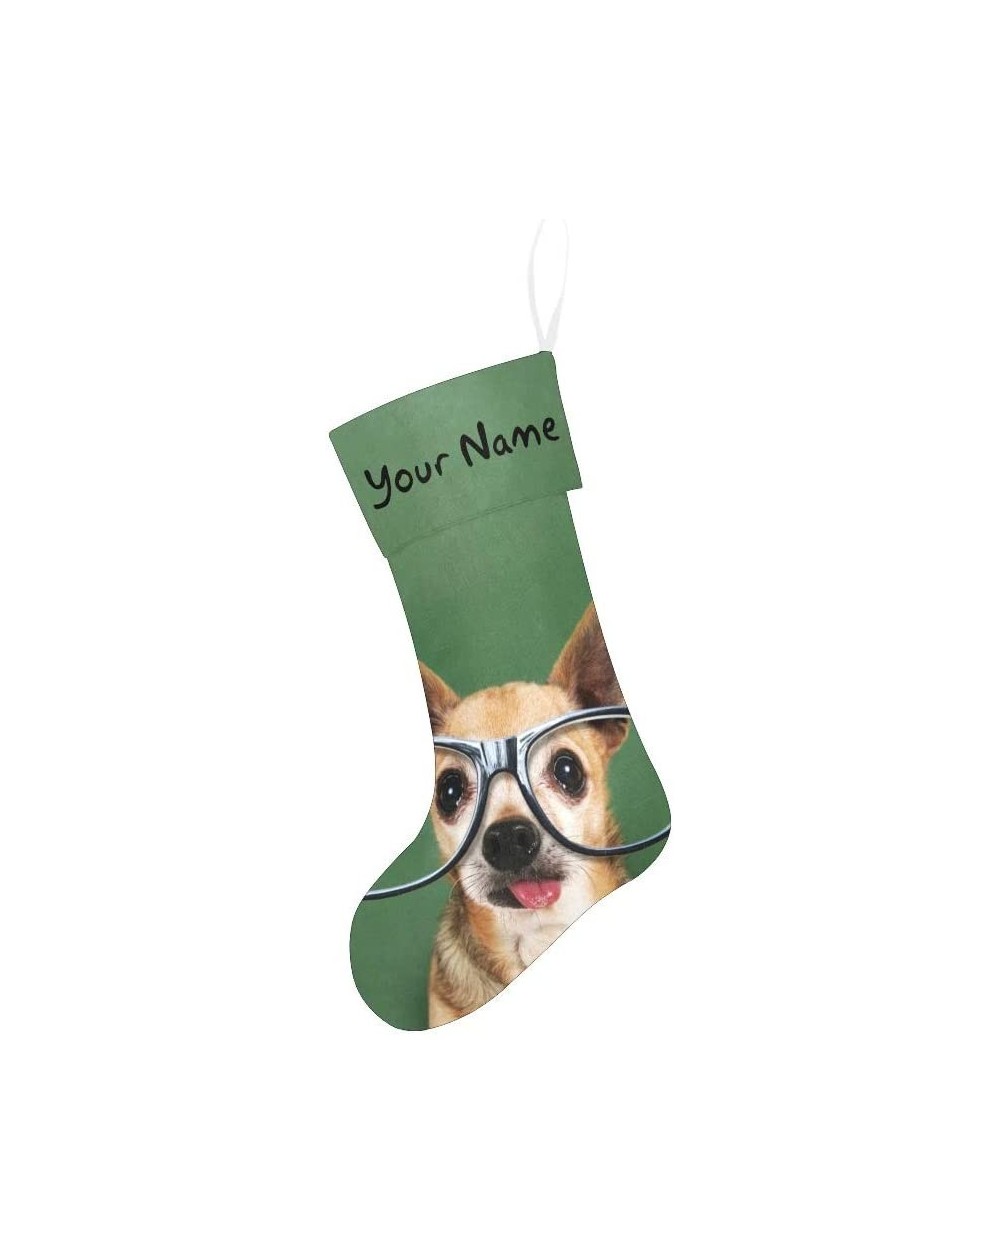 Stockings & Holders Personalized Christmas Stocking with Name Custom Hipster Dog for Xmas Party Decoration Gift 17.52 x 7.87 ...